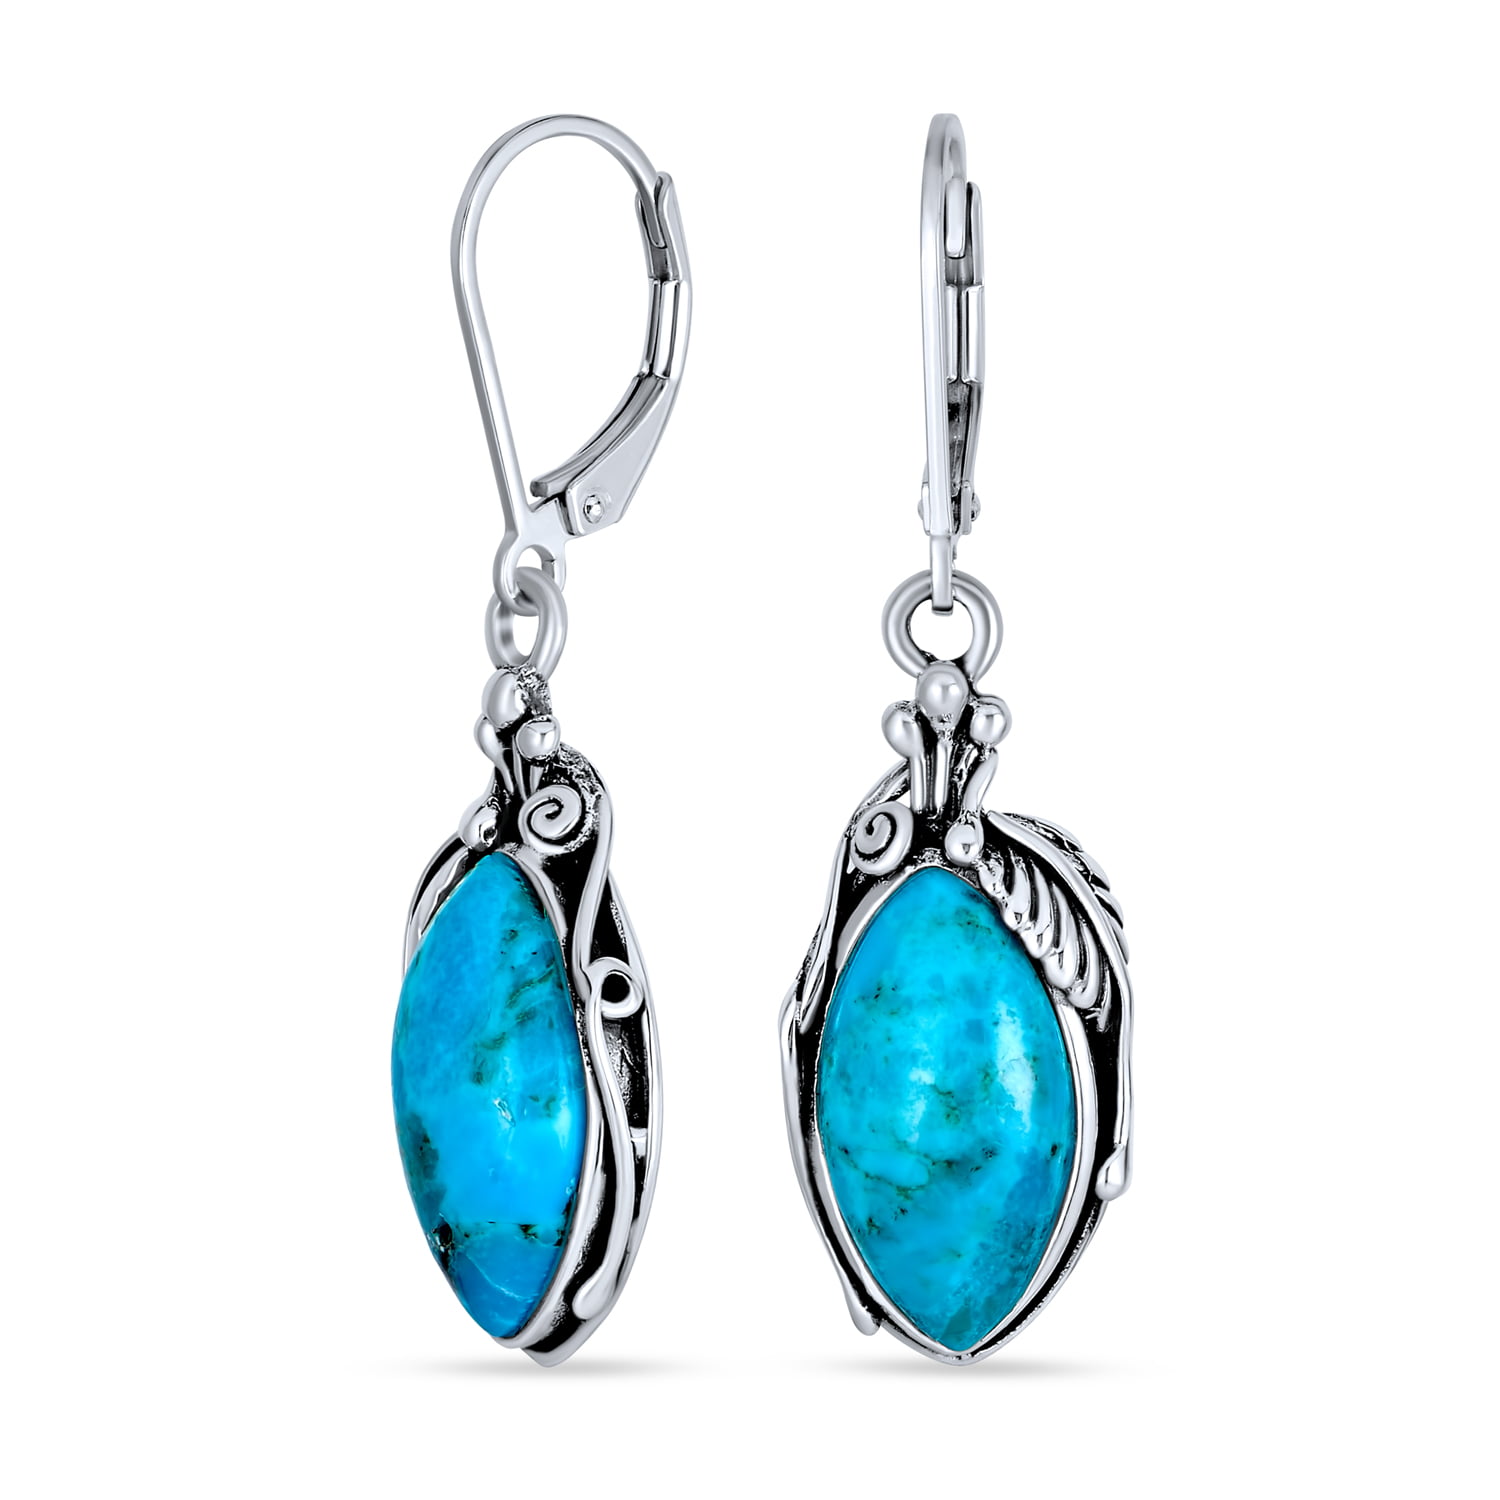 925 Solid Silver OVAL TURQUOISE OXIDIZED DANGLING Earrings 2.5 CM BIRTHDAY GIFT